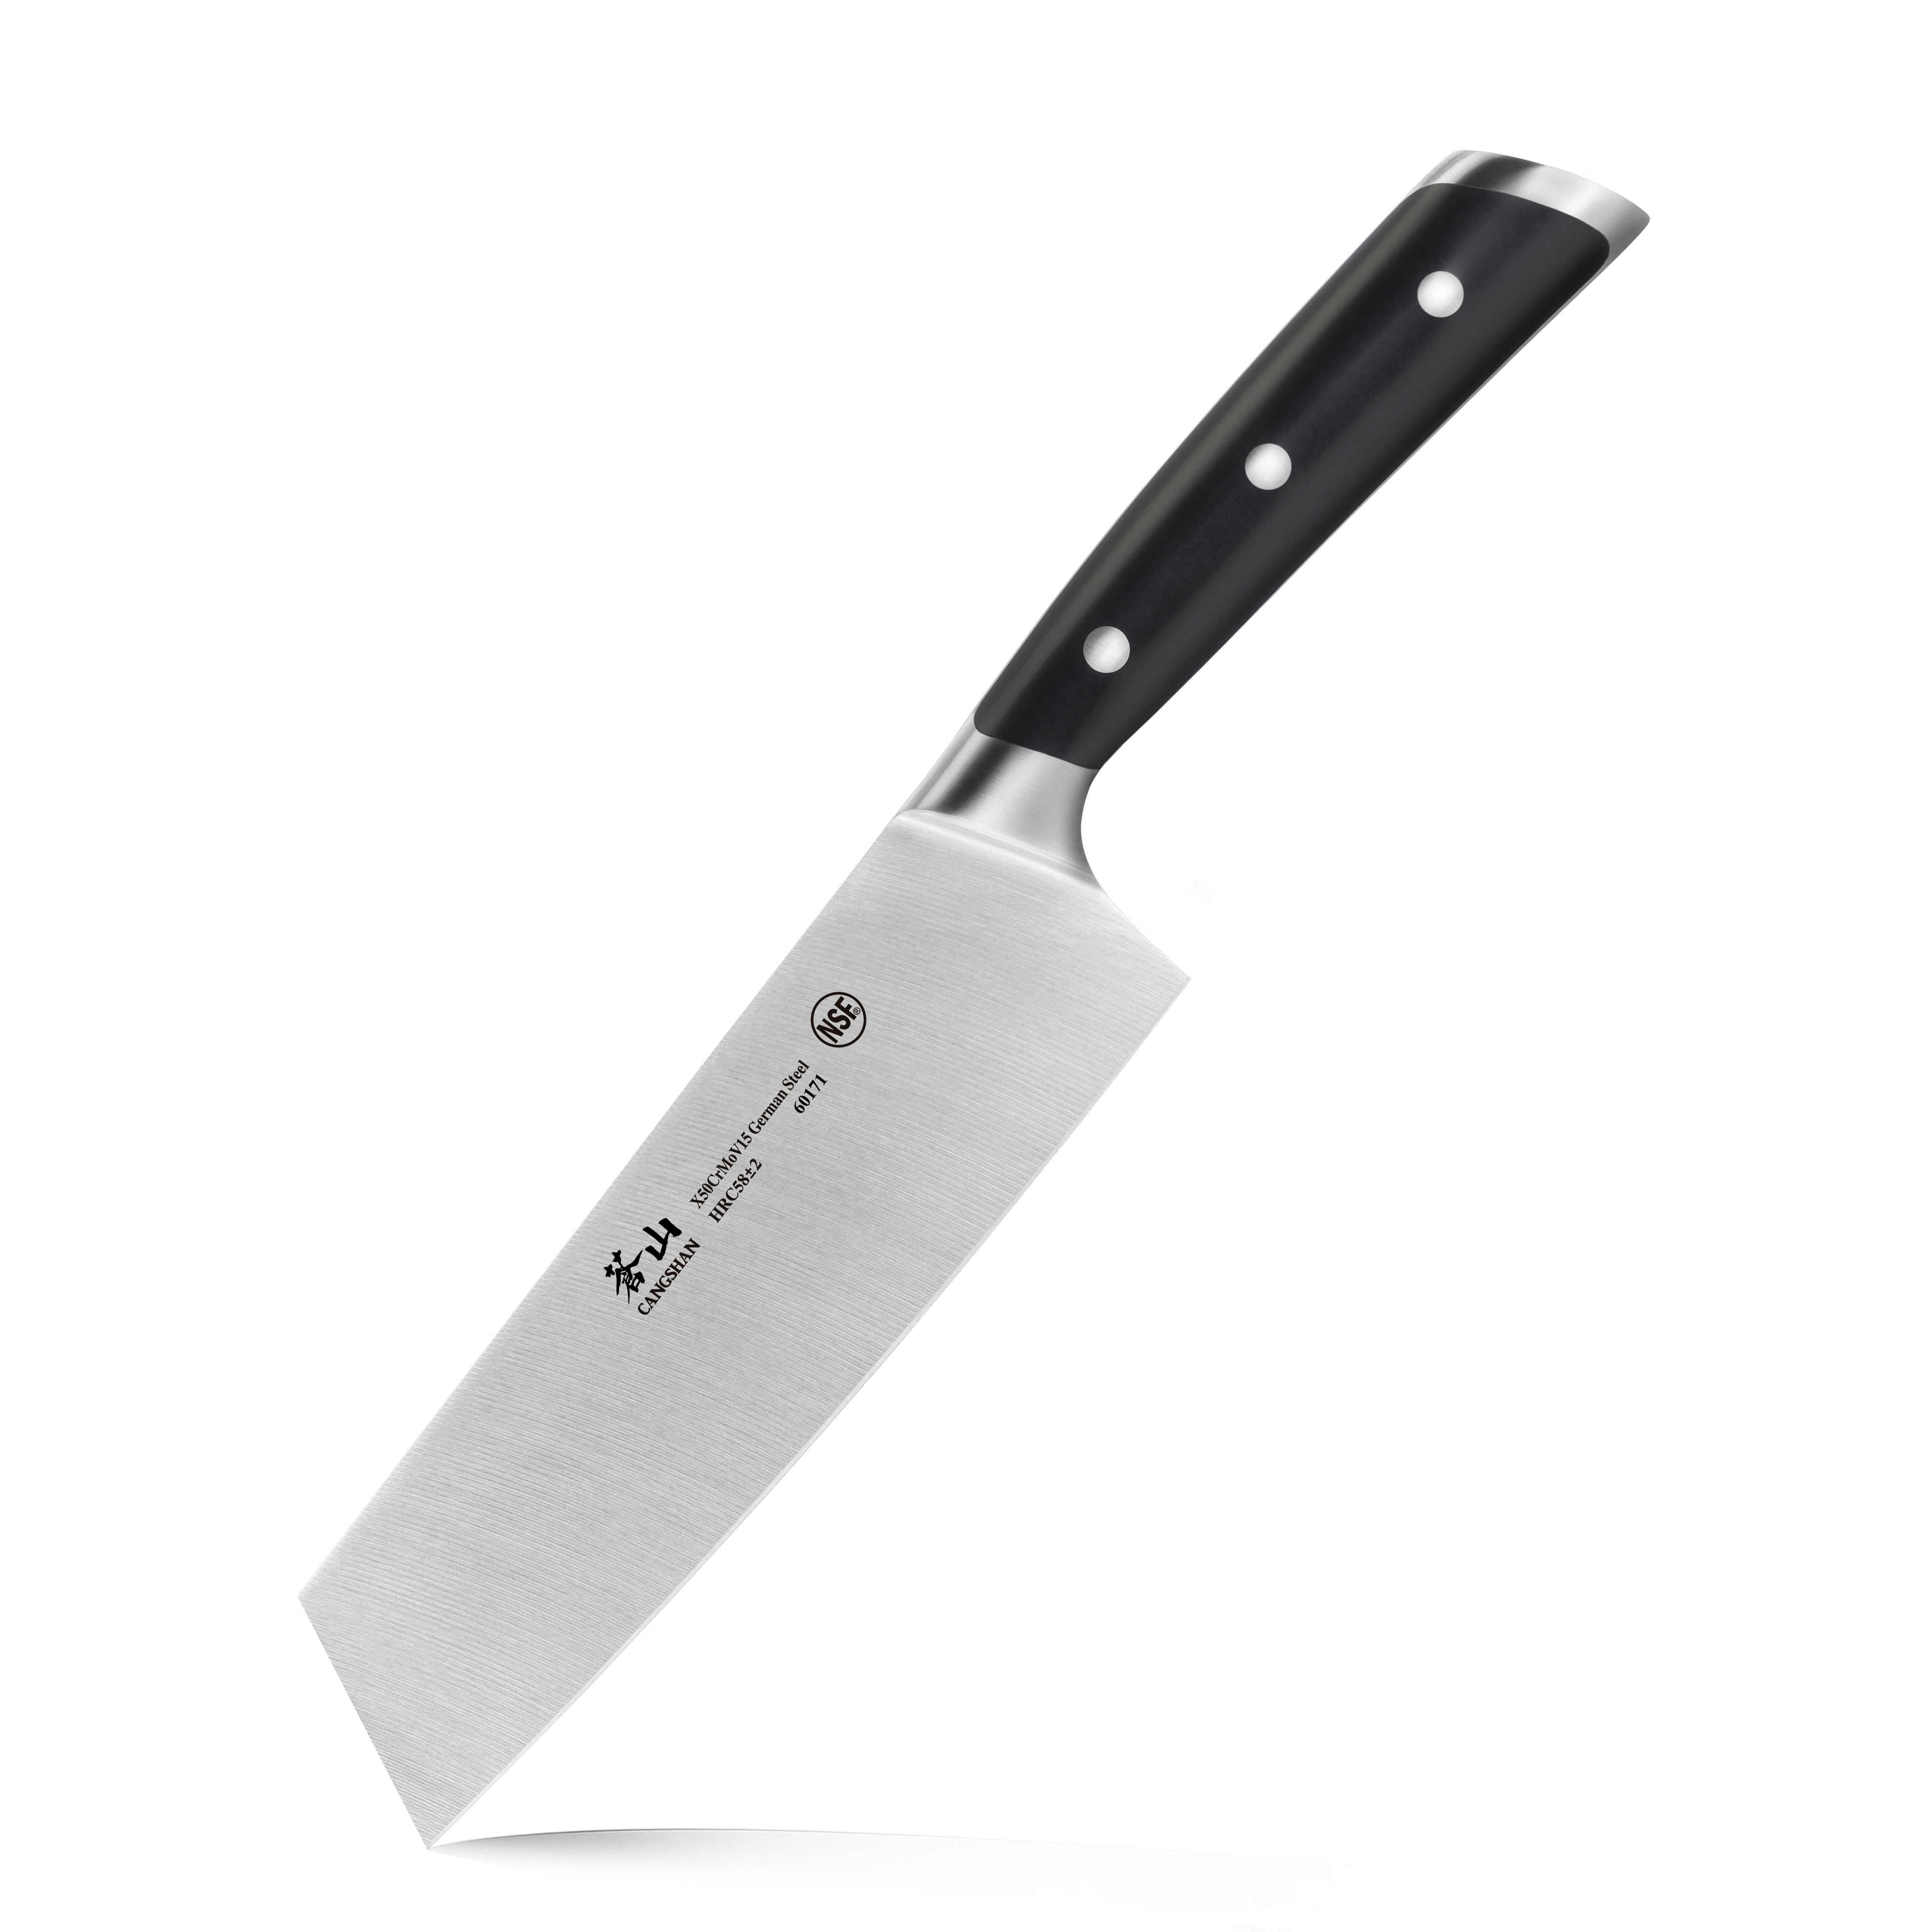 Zanmai SG2 Chinese Chef's Knife - 7 Vegetable Cleaver